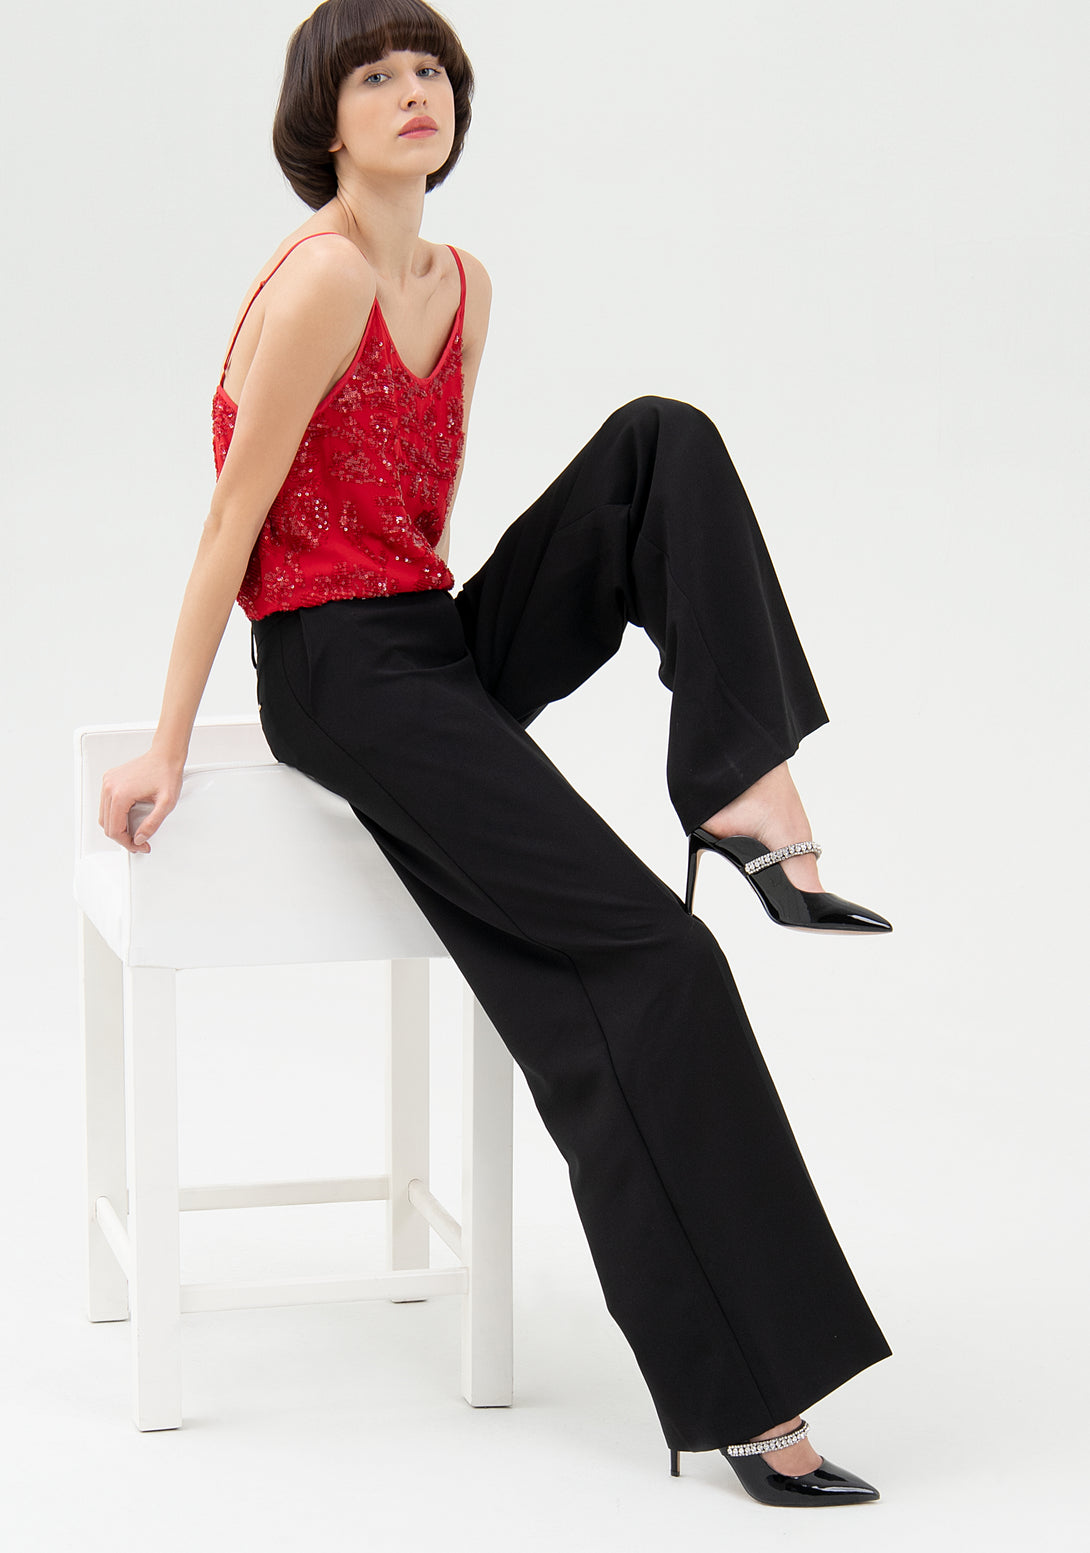 Palazzo pant flare made in technical fabric